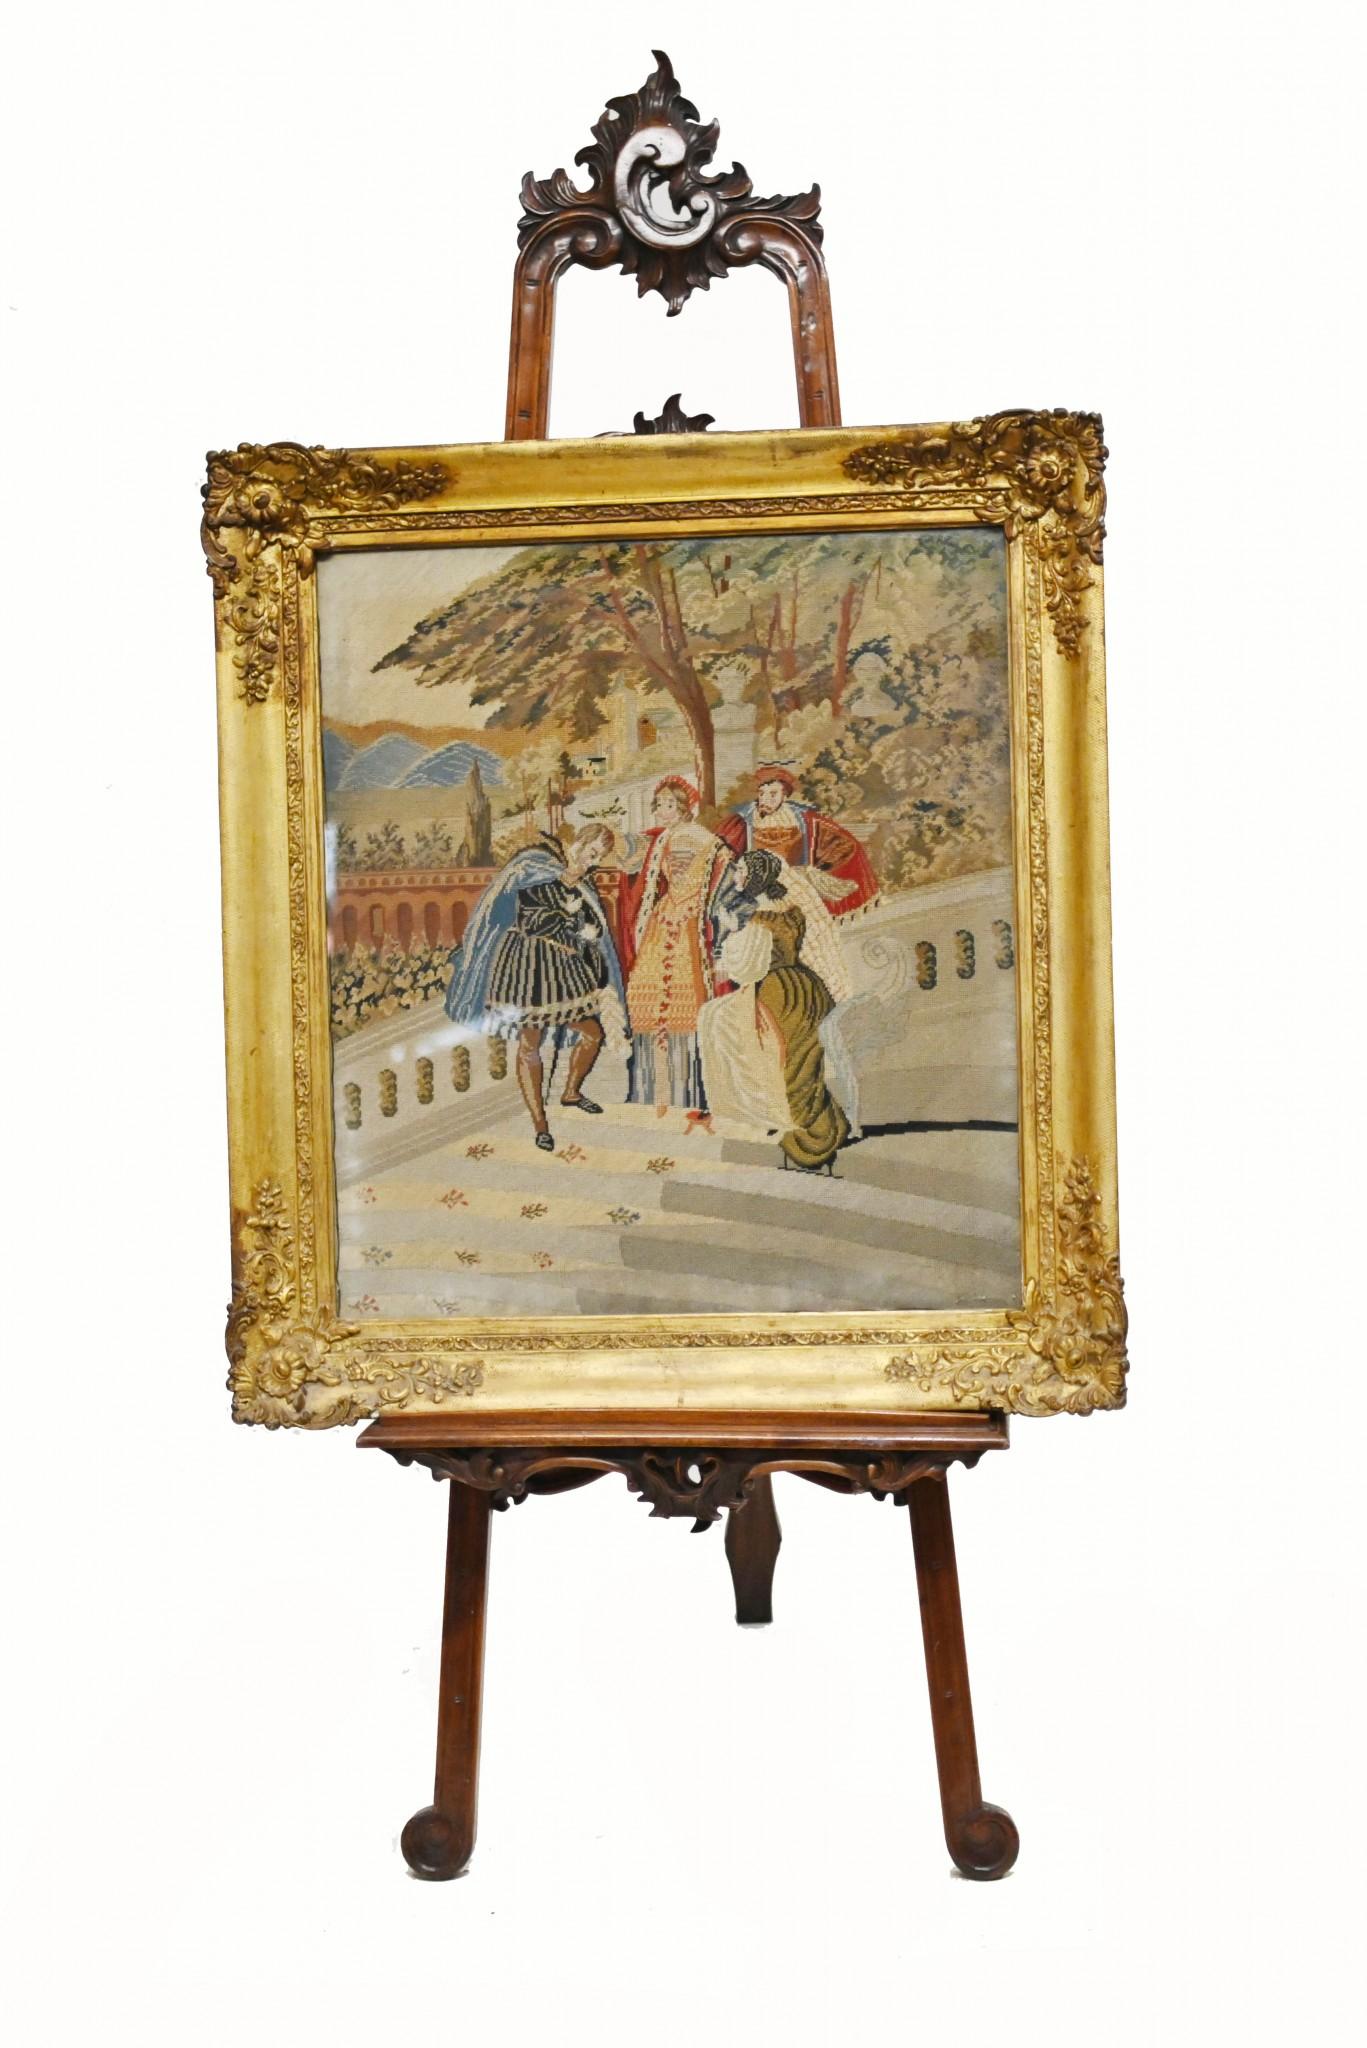 Gorgeous Italian tapestry needlepoint in a gilt frame
Such intricate needlepoint work showing a nobleman on the steps of their Tuscan villa
Gilt frame itself is a work of art and hand carved
Great piece to be hung on the wall
Circa 1880
Offered in